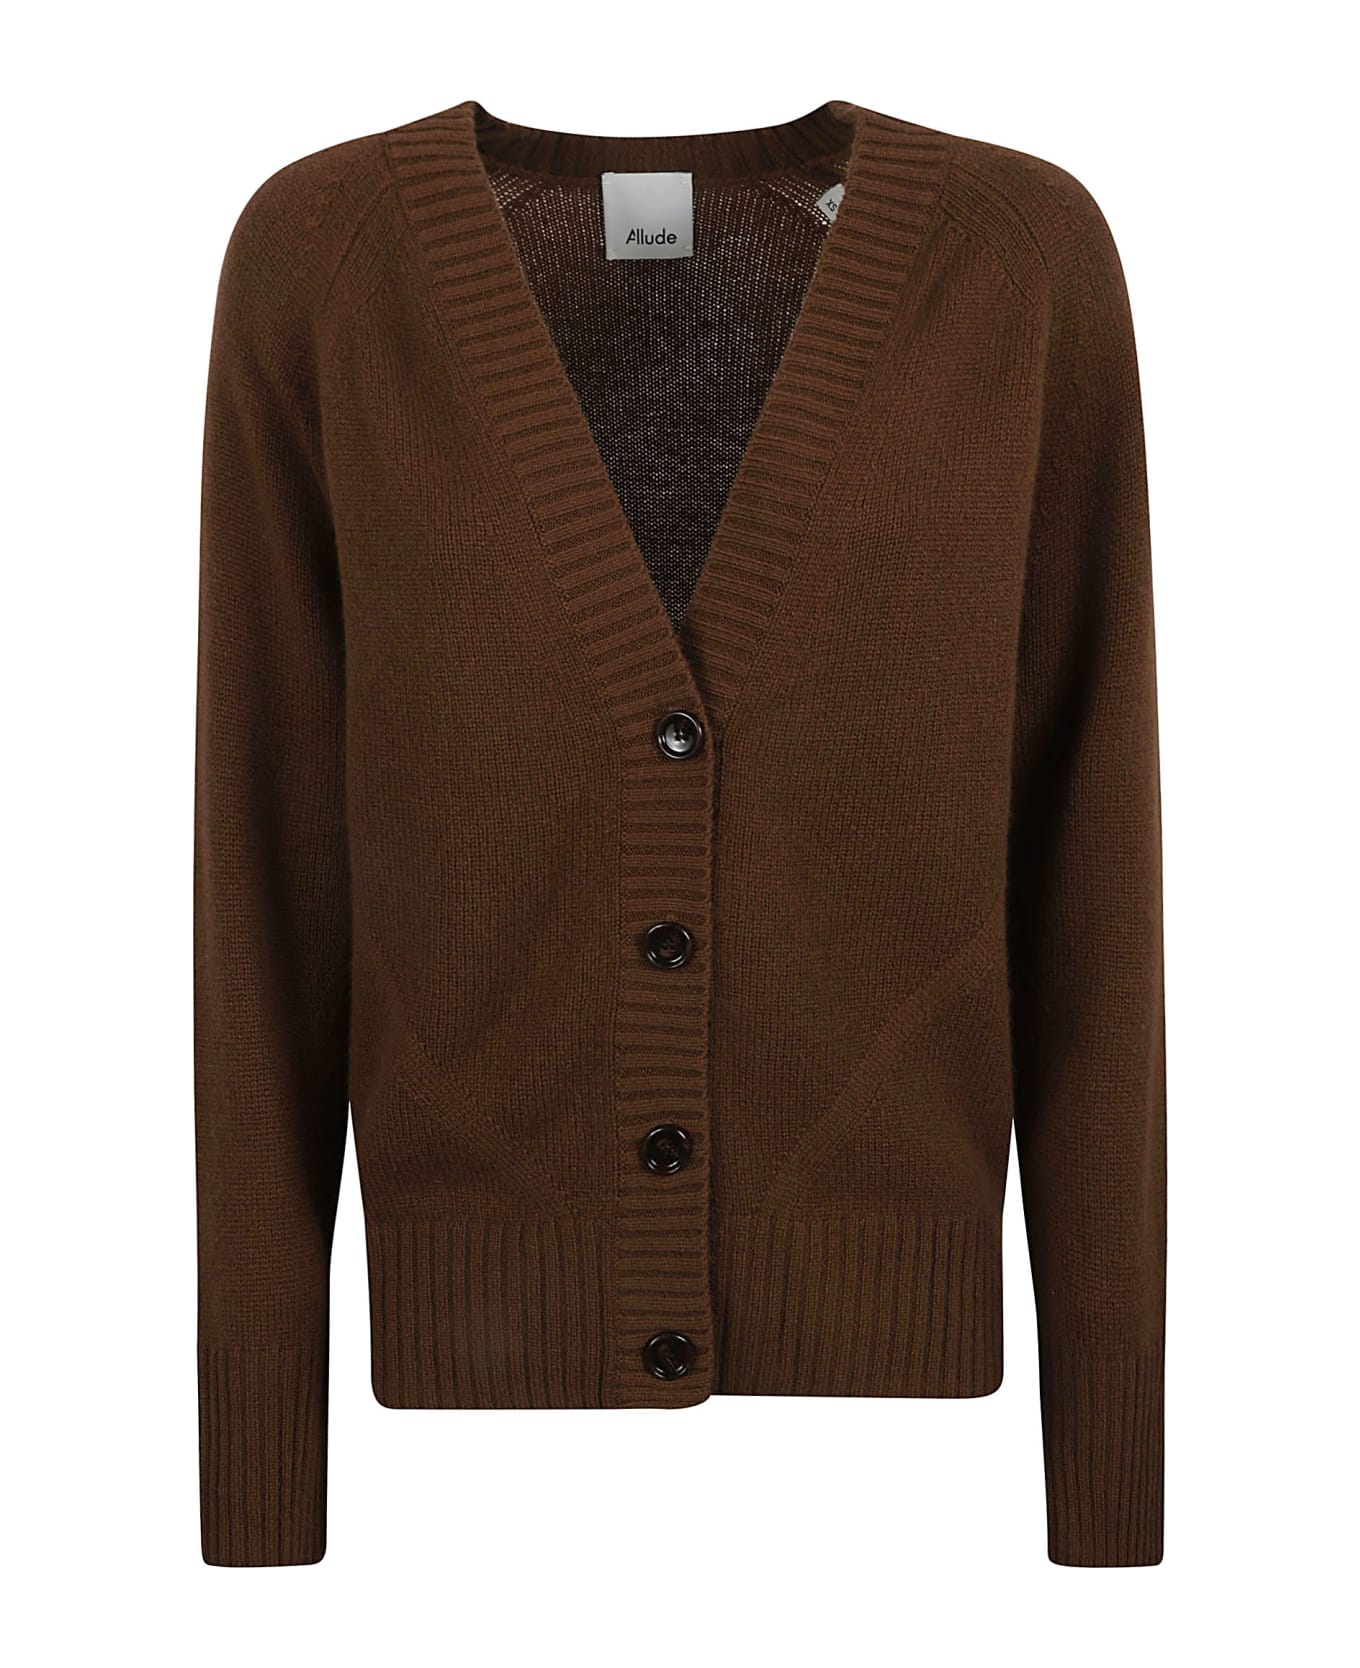 Allude V-neck Cardigan - Brown カーディガン